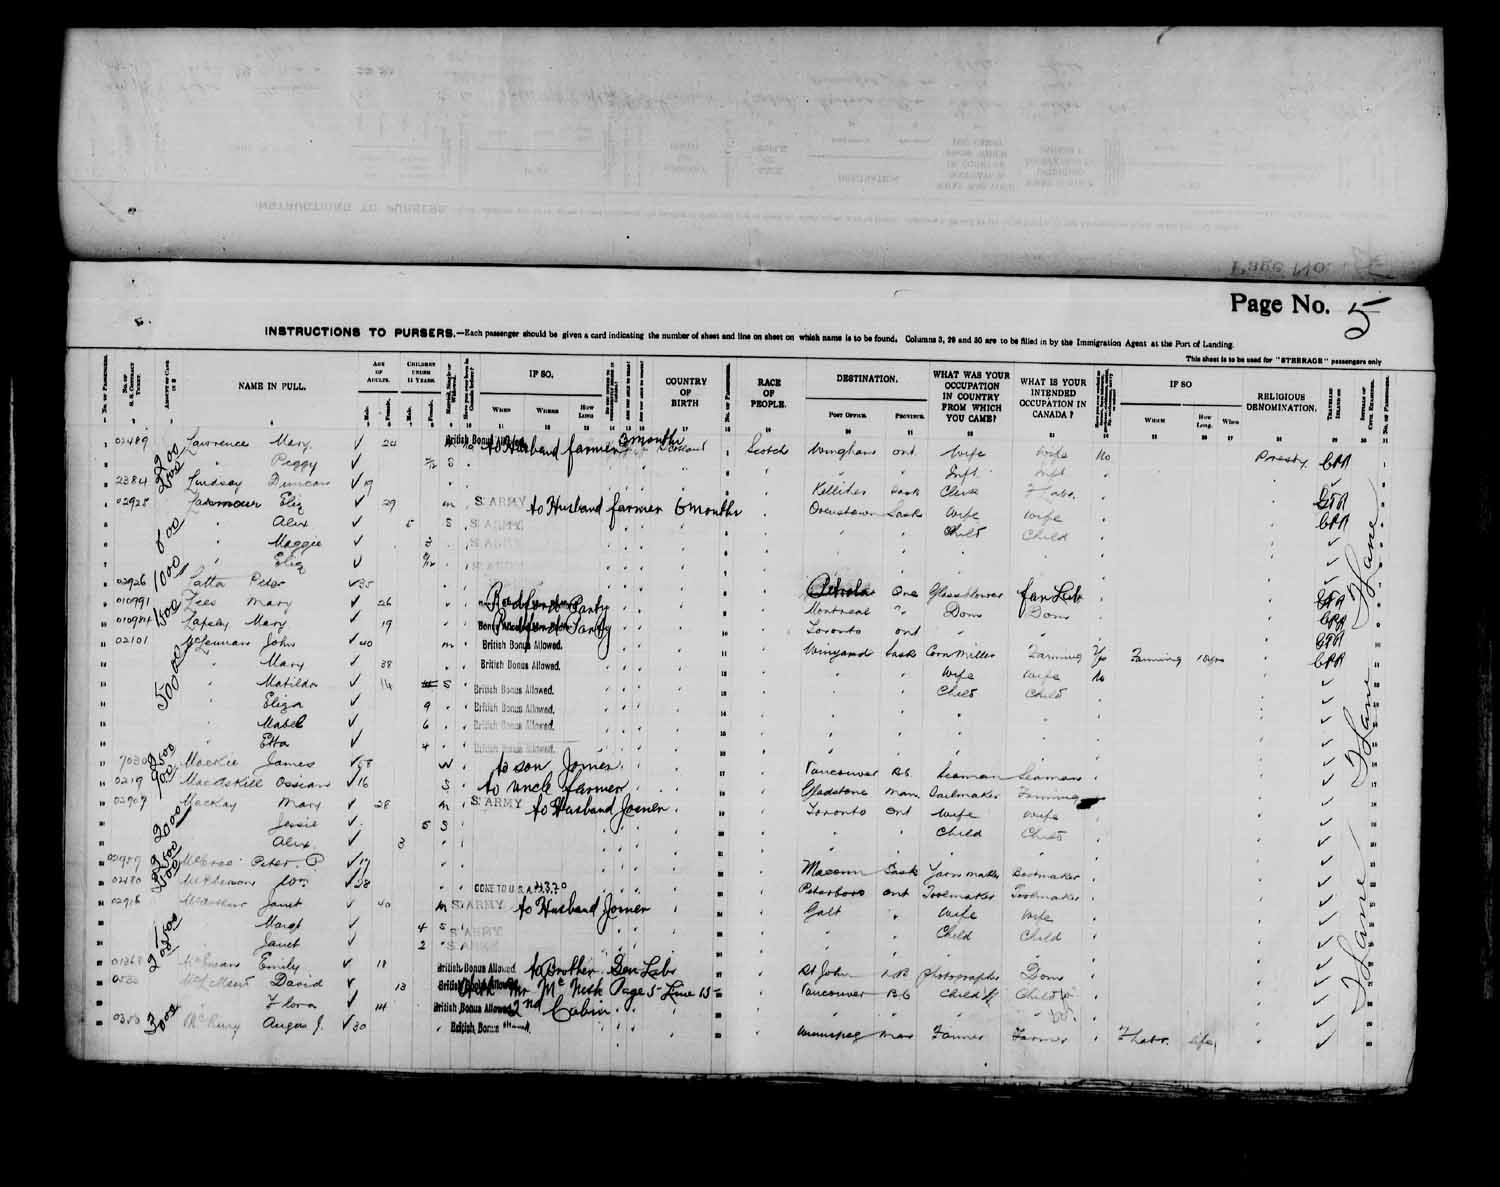 Digitized page of Passenger Lists for Image No.: e003566524